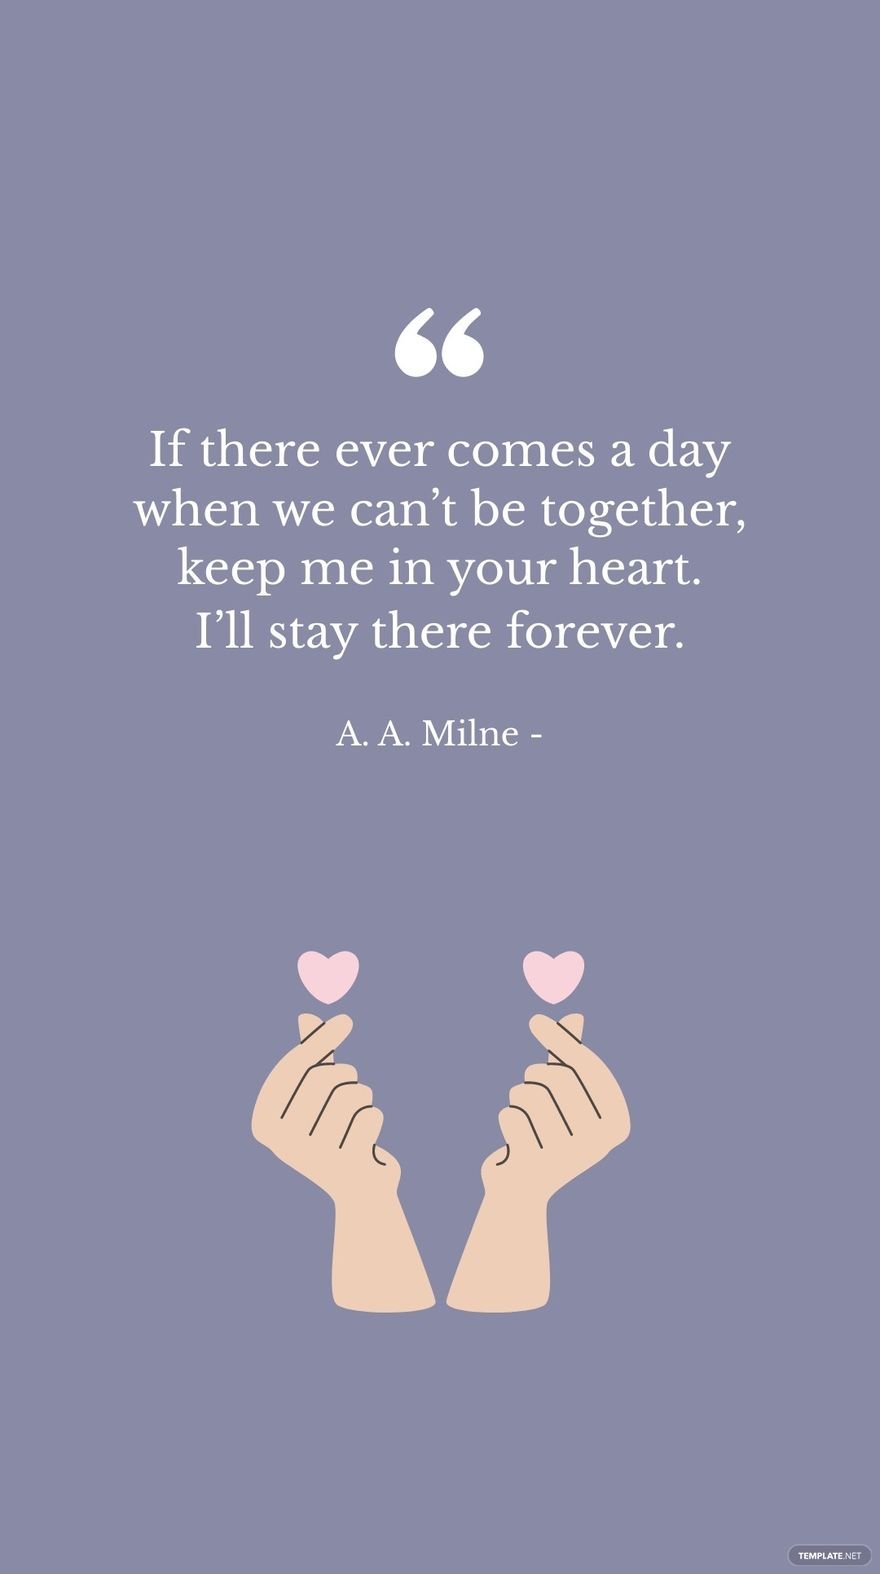 A. A. Milne - If there ever comes a day when we can’t be together, keep me in your heart. I’ll stay there forever.